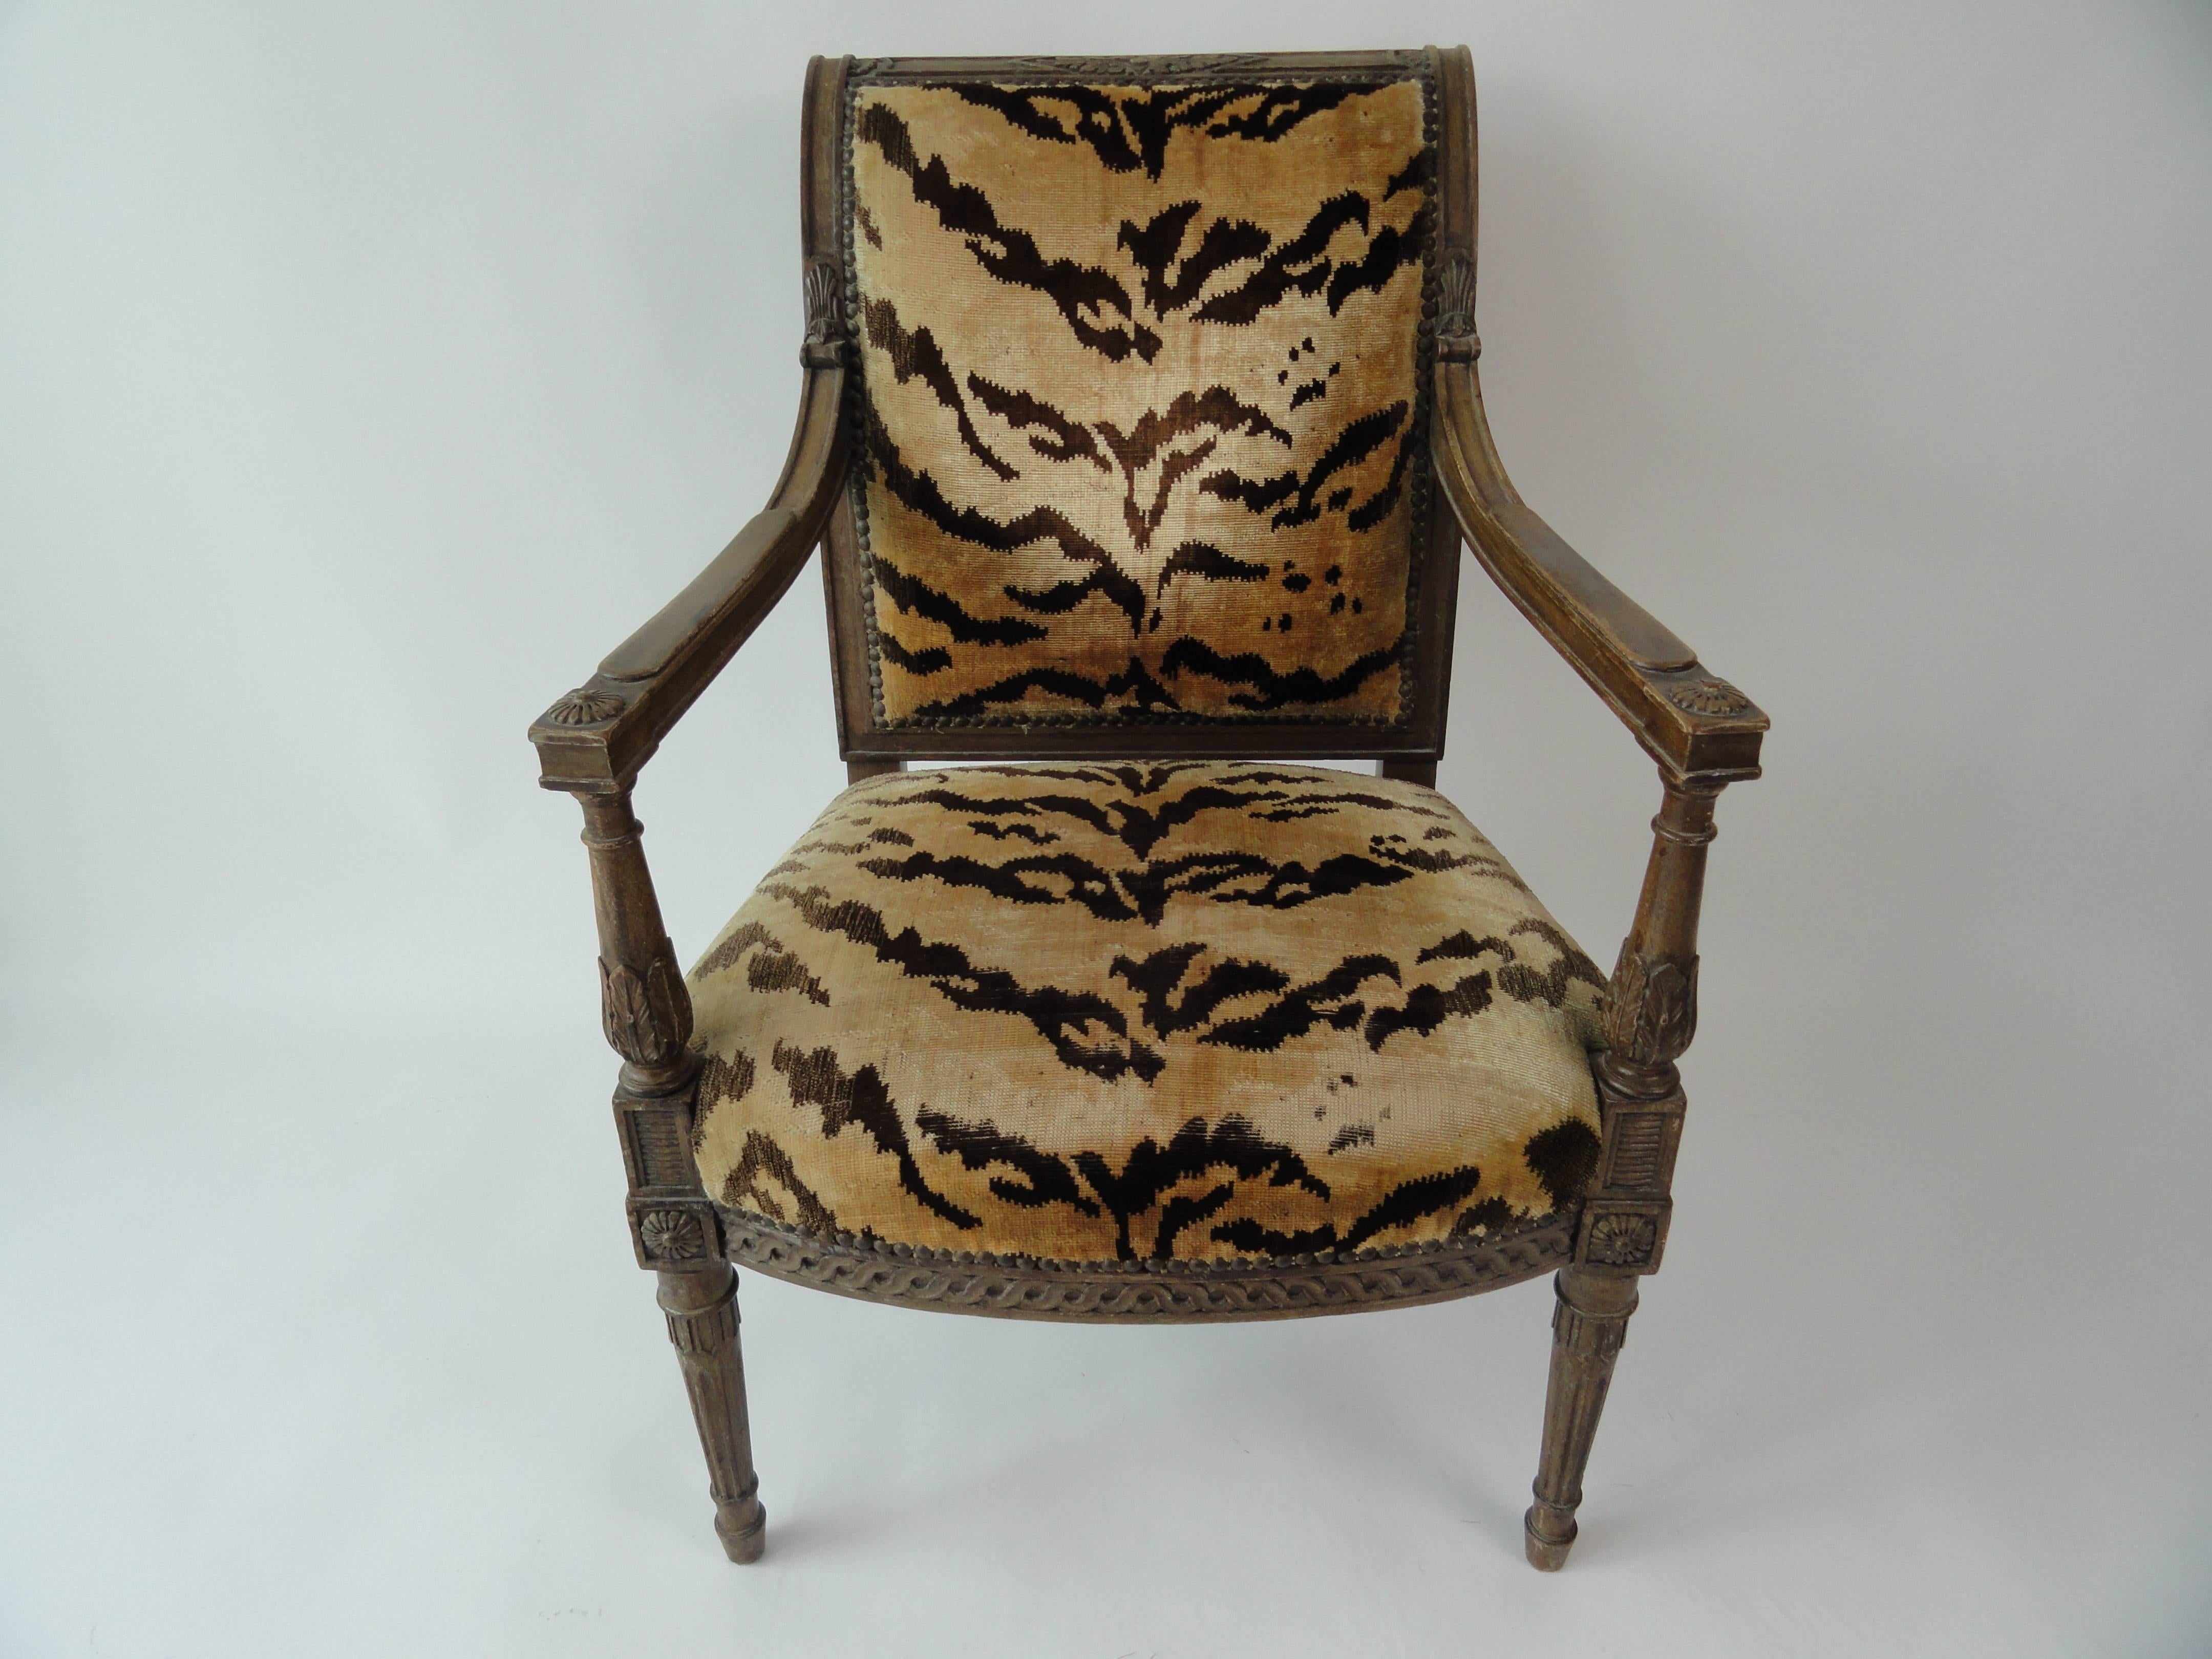 20th century Directoire-style armchair bye Yale R. Burge covered in silk tiger velvet, good condition. Beechwod.